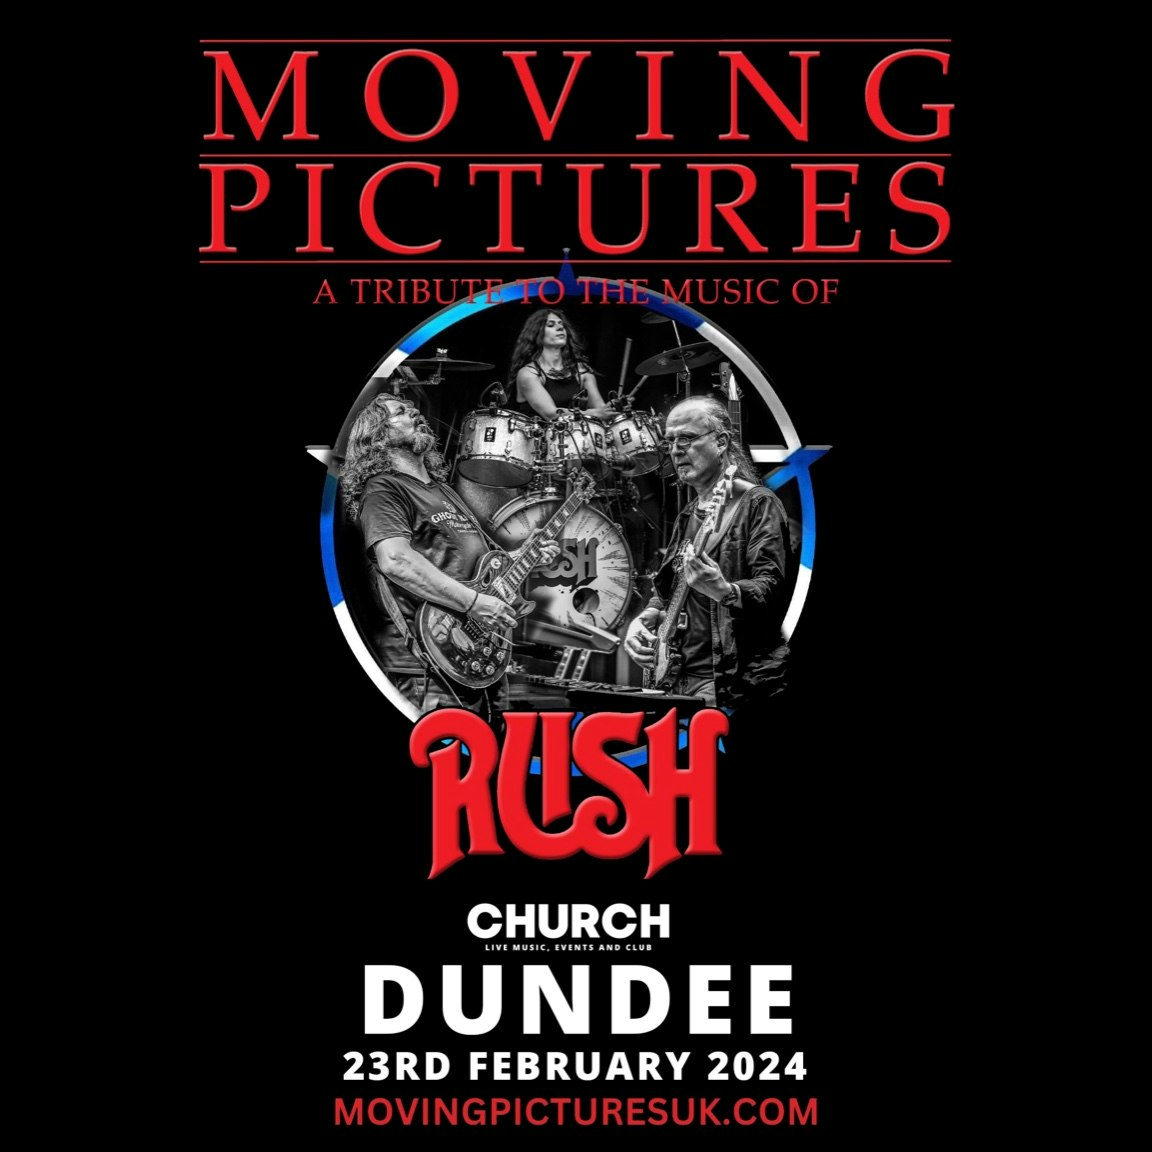 Moving Pictures – Rush Tribute Live